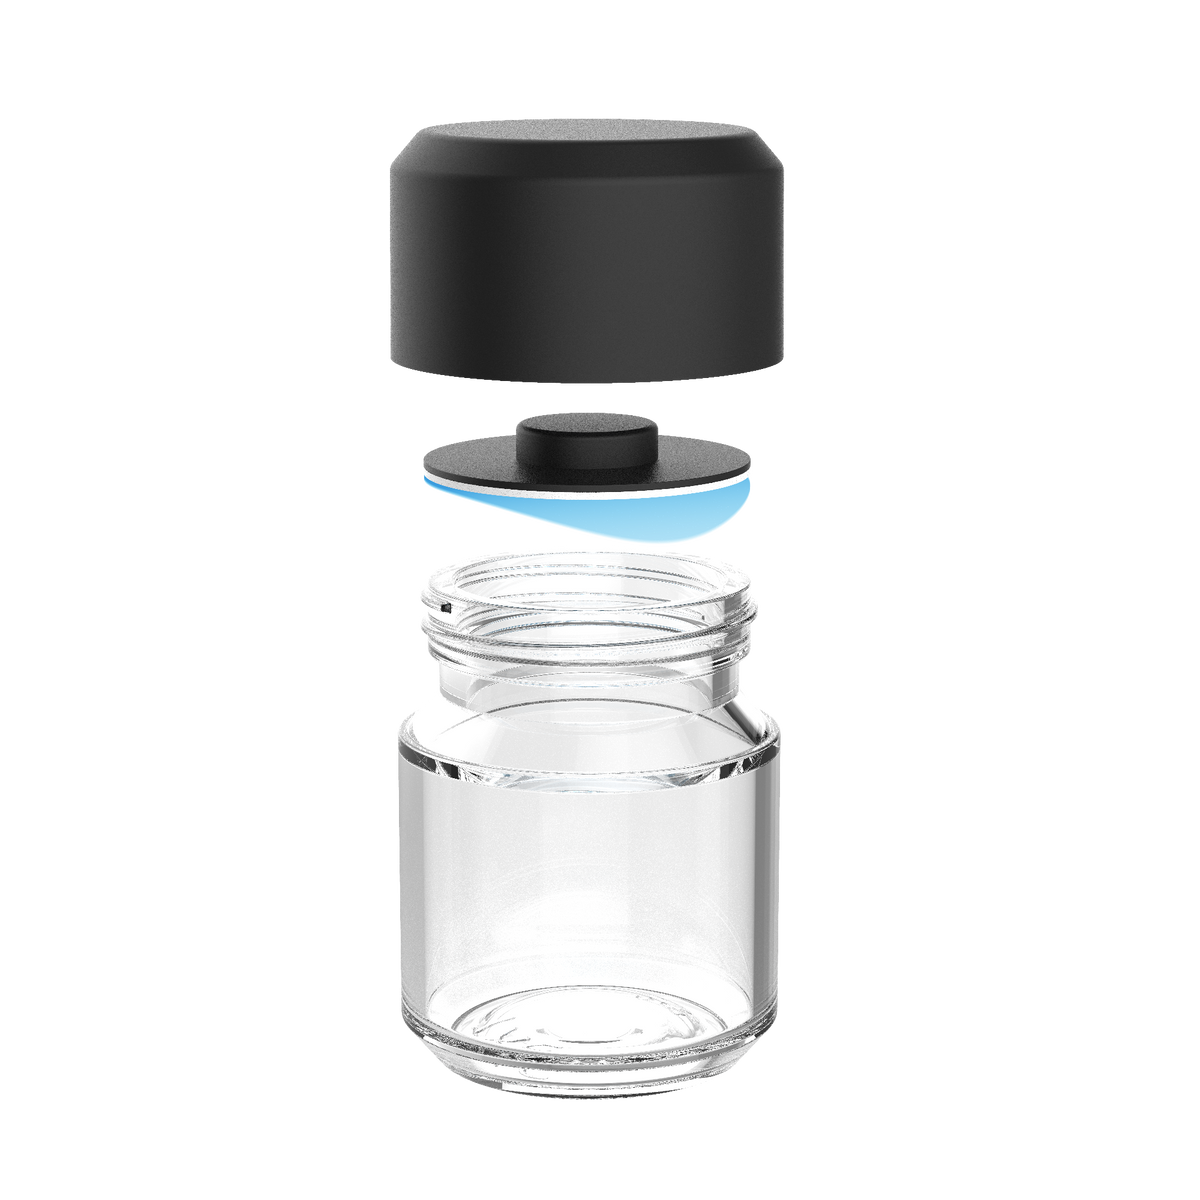 Download Clear glass jar w/ child-resistant humidity control - Kanvas